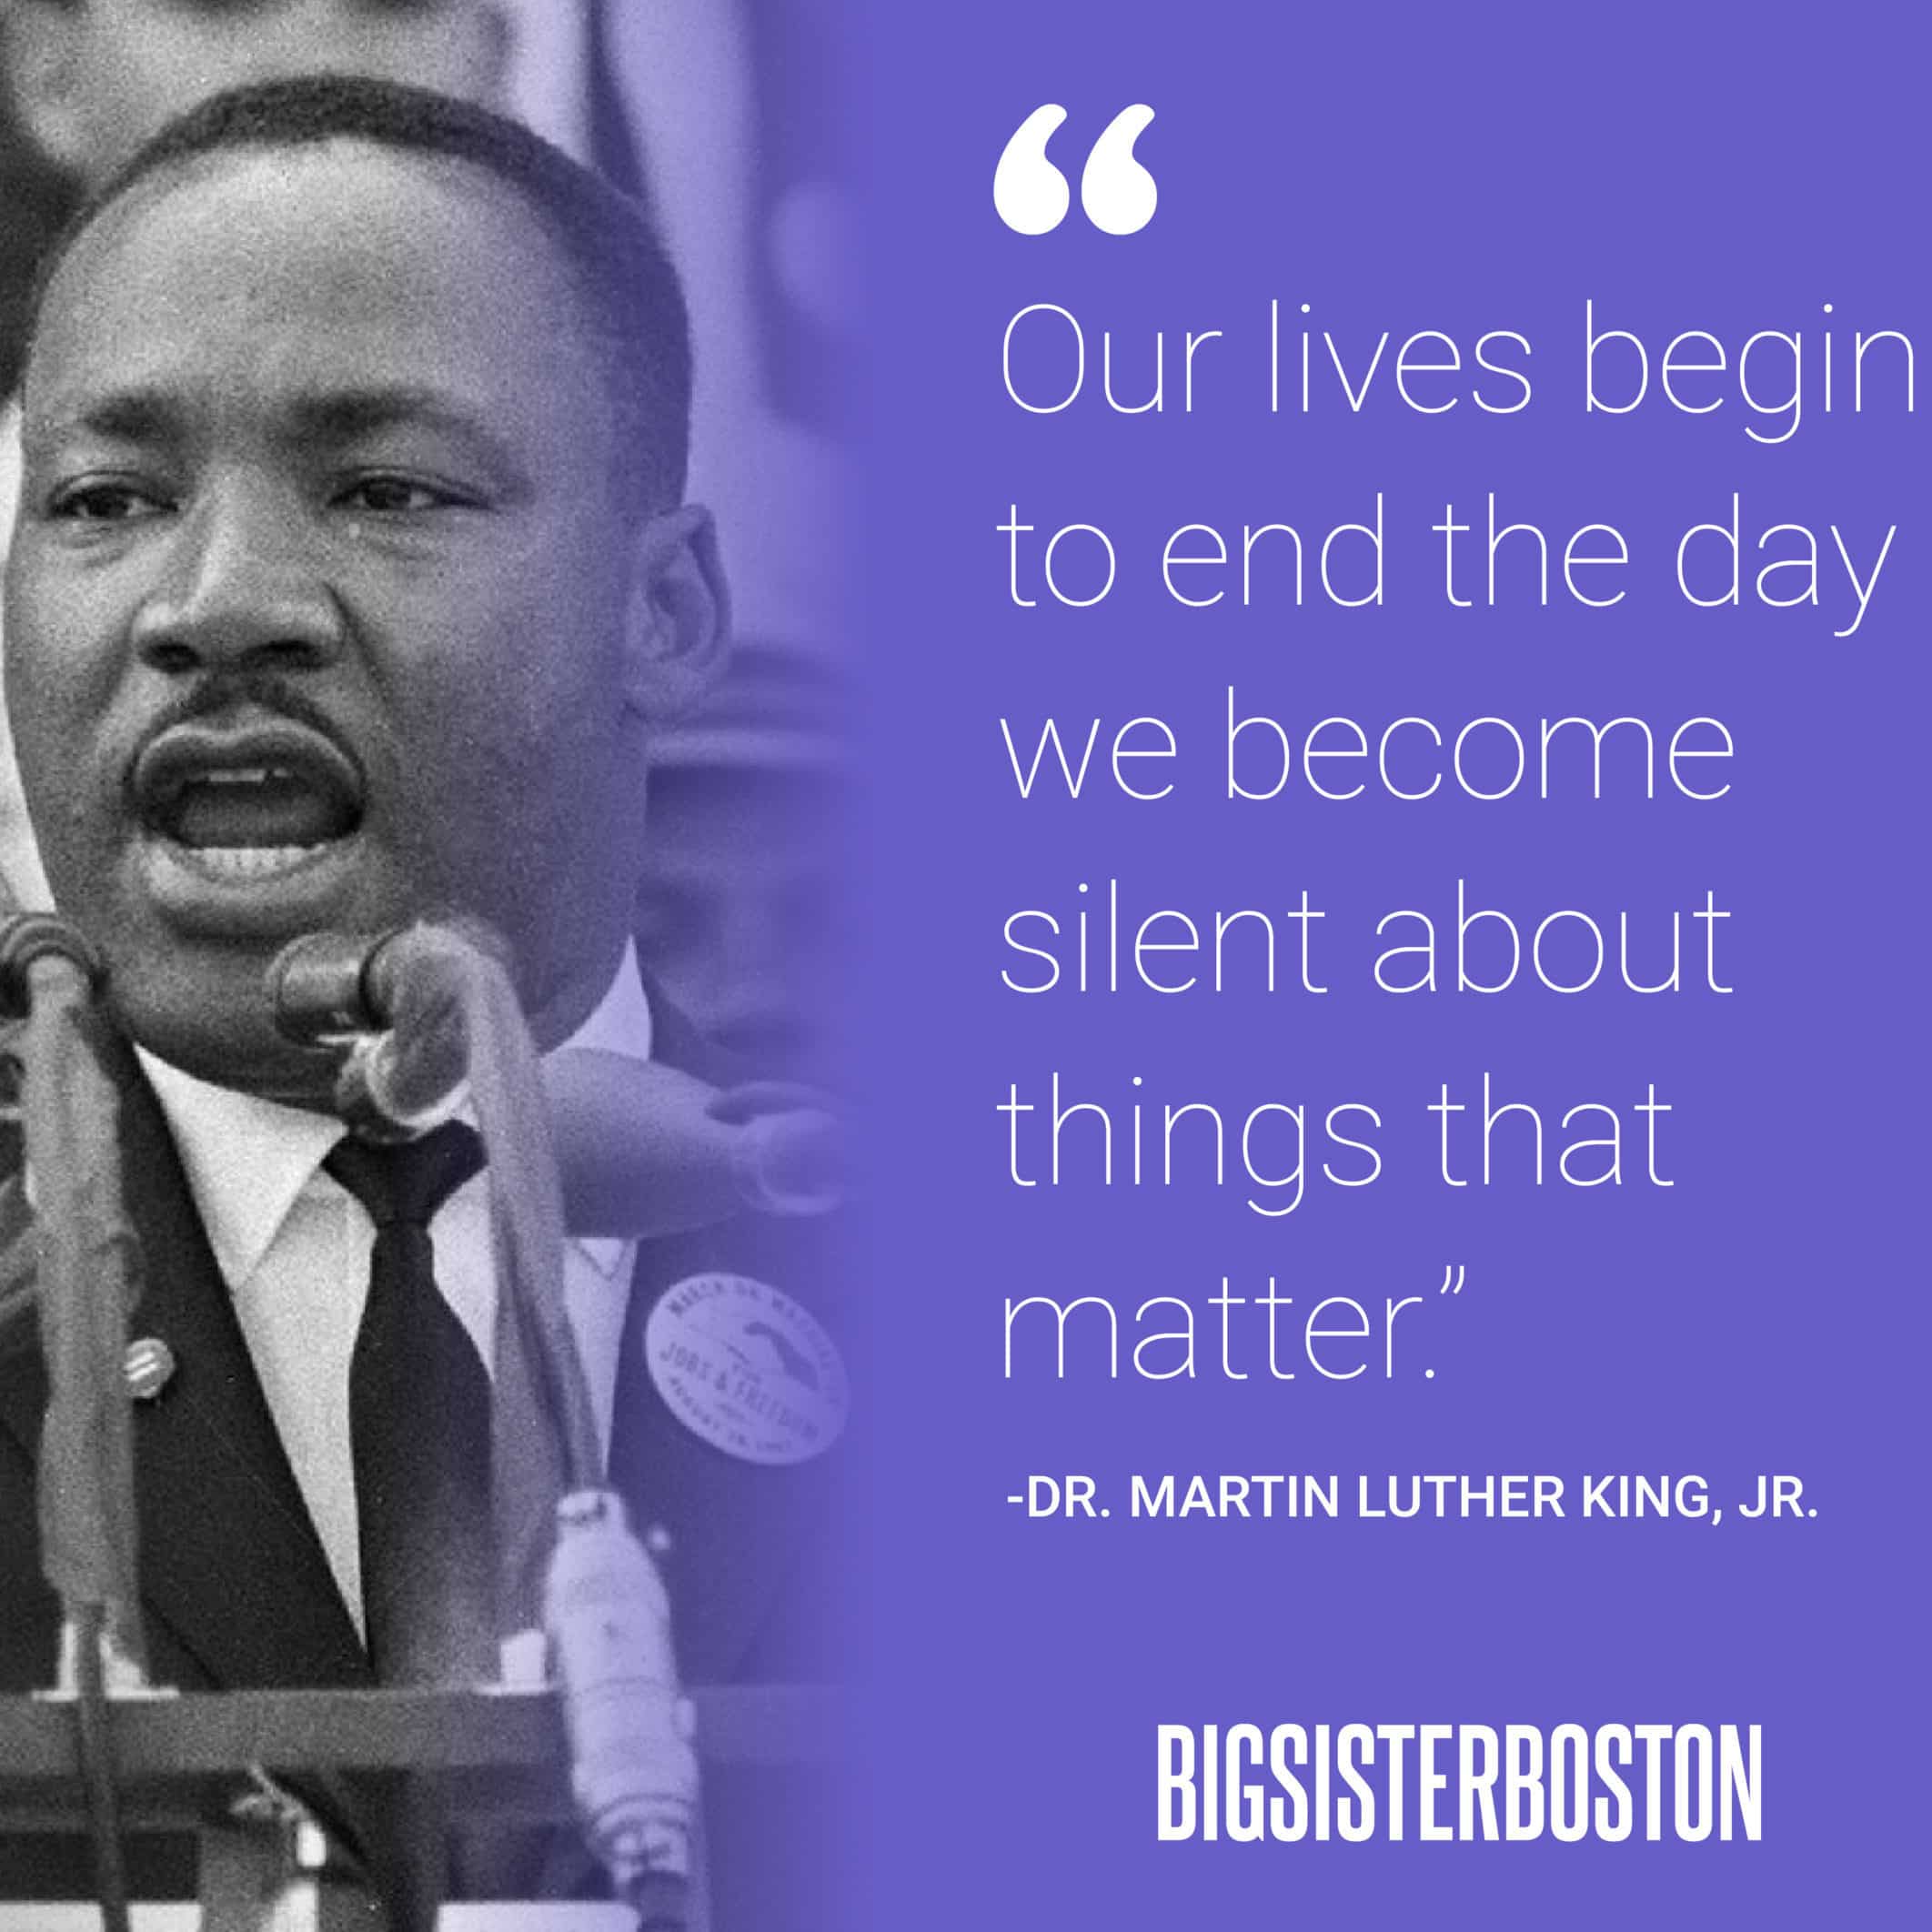 picture of MLK, JR. with his quote "Our lives begin to end the day we become silent about things that matter"